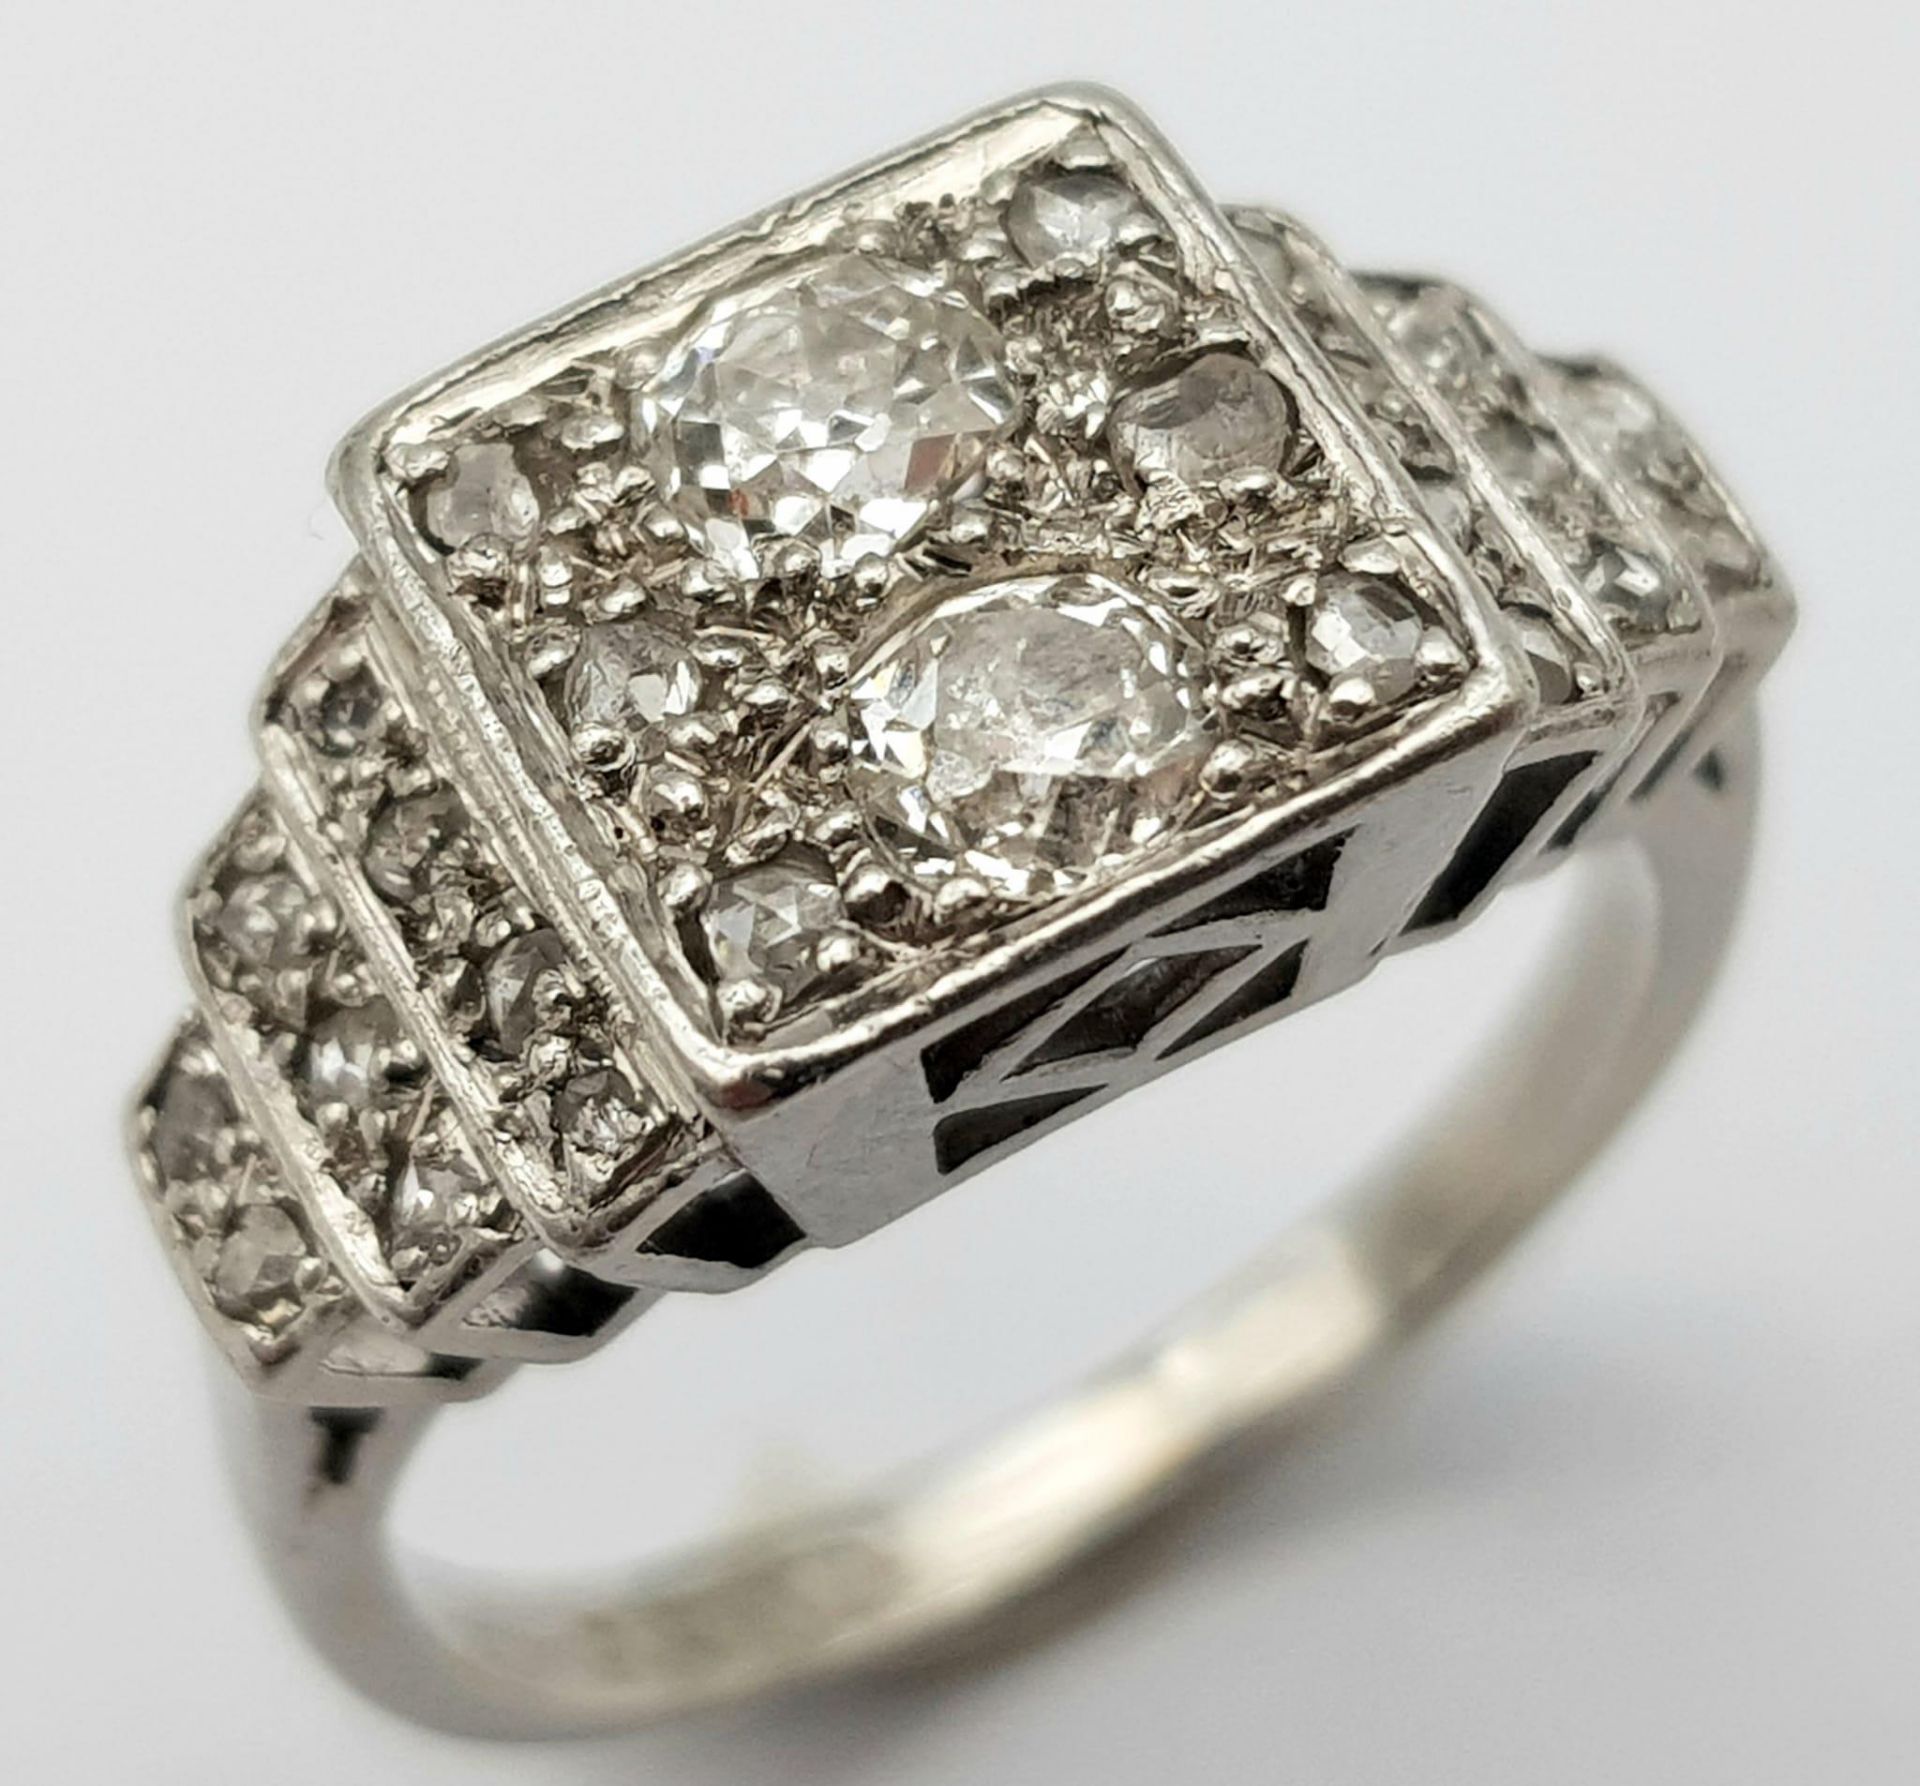 A VINTAGE PLATINUM DIAMOND RING, APPROX 0.65CT DIAMONDS TOTAL, WEIGHT 6.8G SIZE M